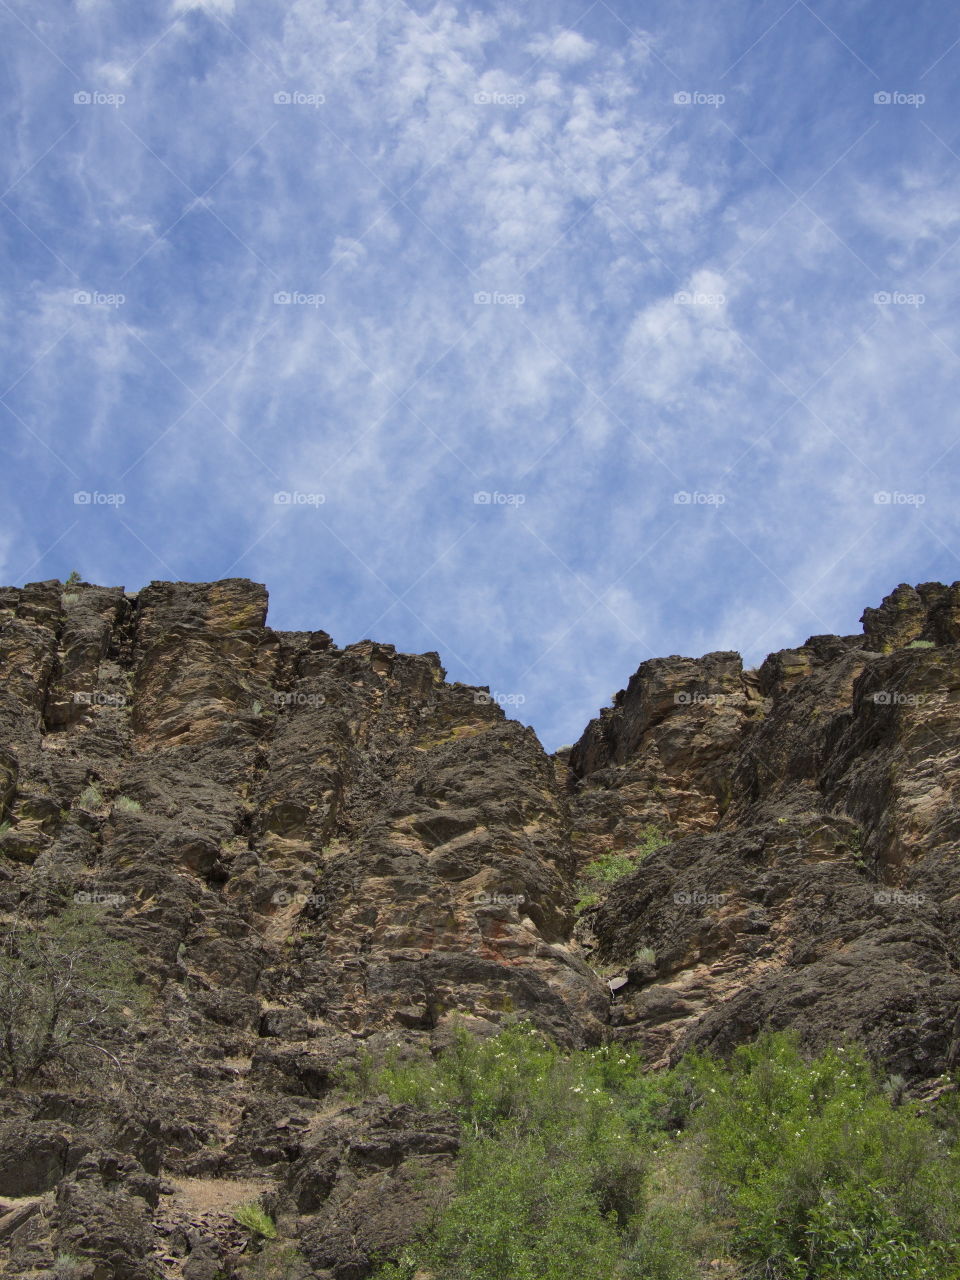 A layered and jagged cliff towers above the trees reaching for the sky. 